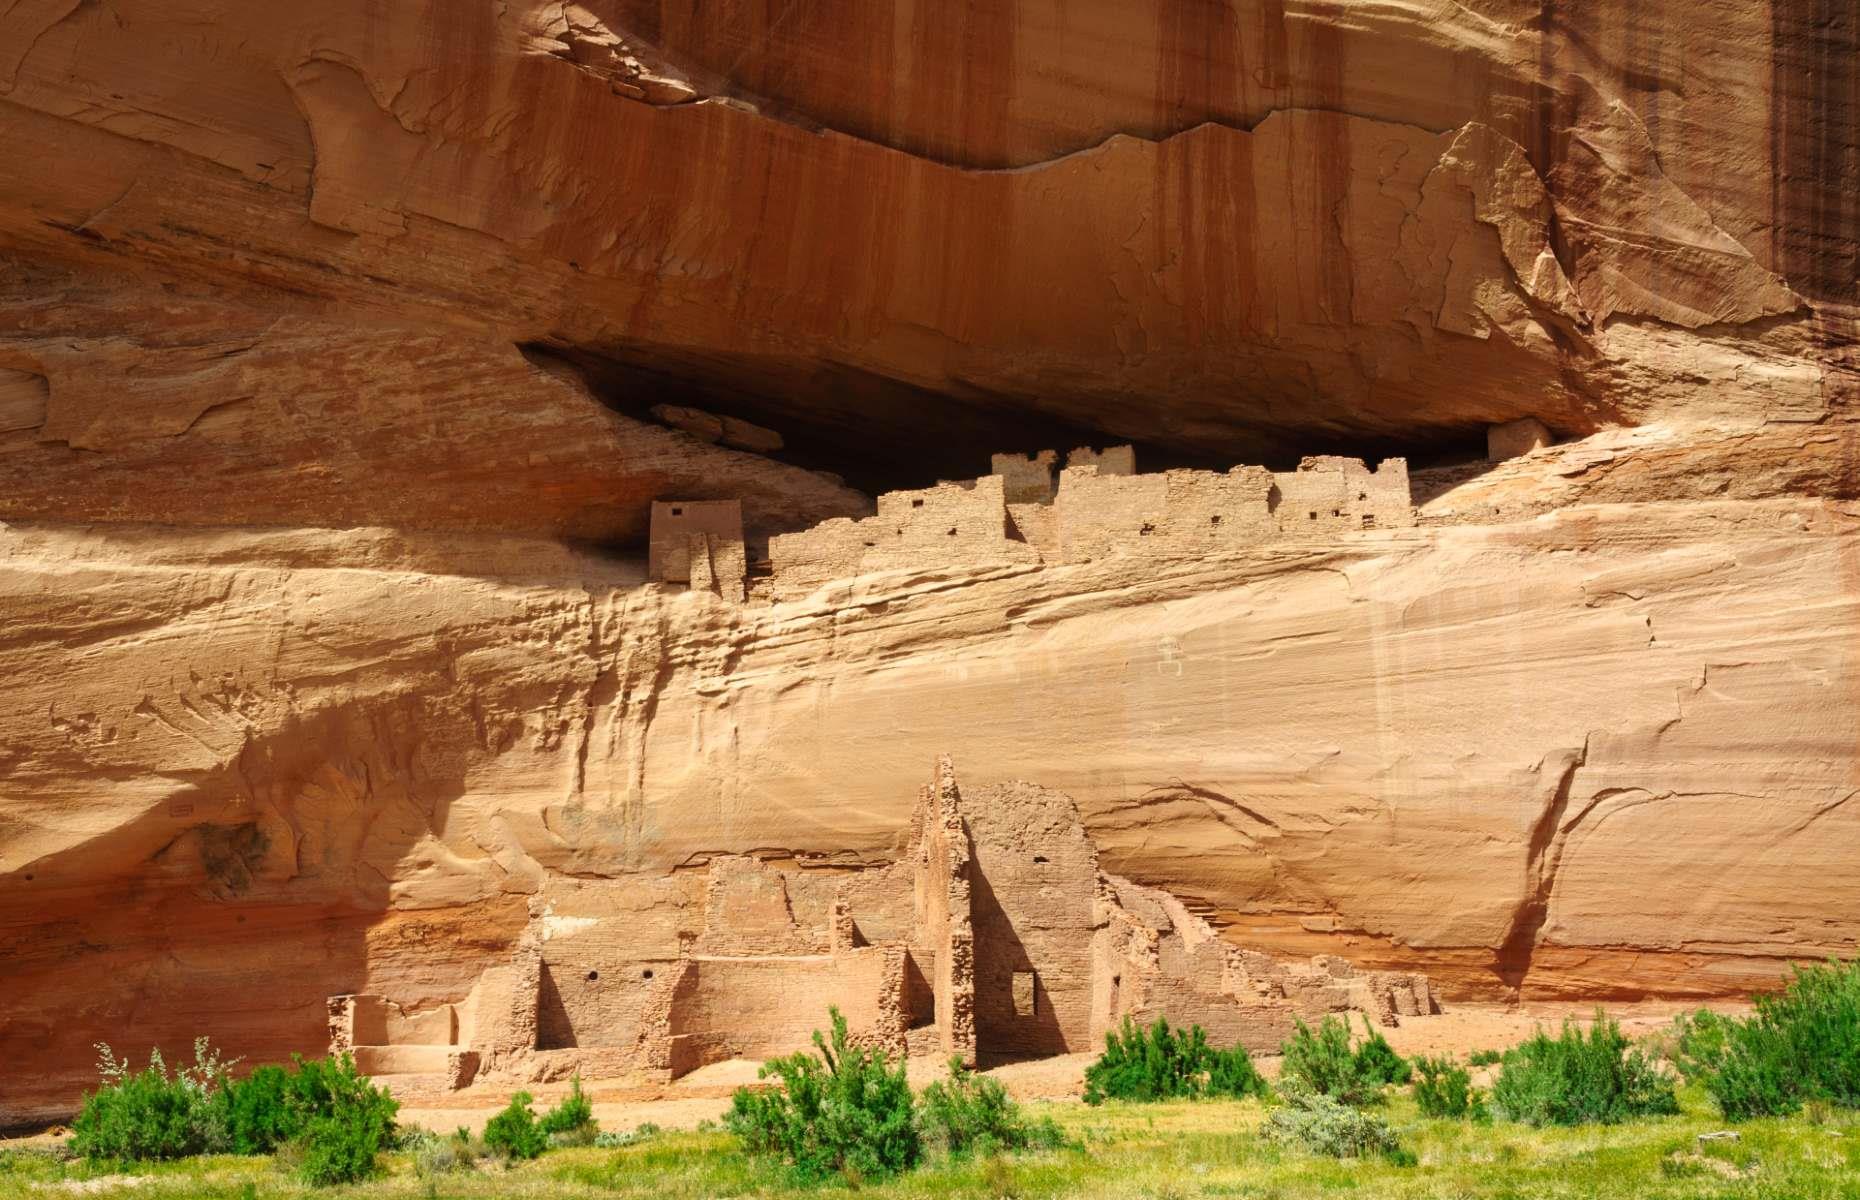 Offering a reminder of Arizona’s ancient past, these fascinating cliff-carved buildings are well worth a visit. Located in the Navajo Nation in northeastern Arizona, the Canyon de Chelly was home to ancient Puebloan people for some 5,000 years, who created the cliff dwellings here sometime between AD 350 and AD 1300. If you wish to enter the national park today, it’s free to do so, although access to the canyon is due to the significant number of Navajo families that currently live here.